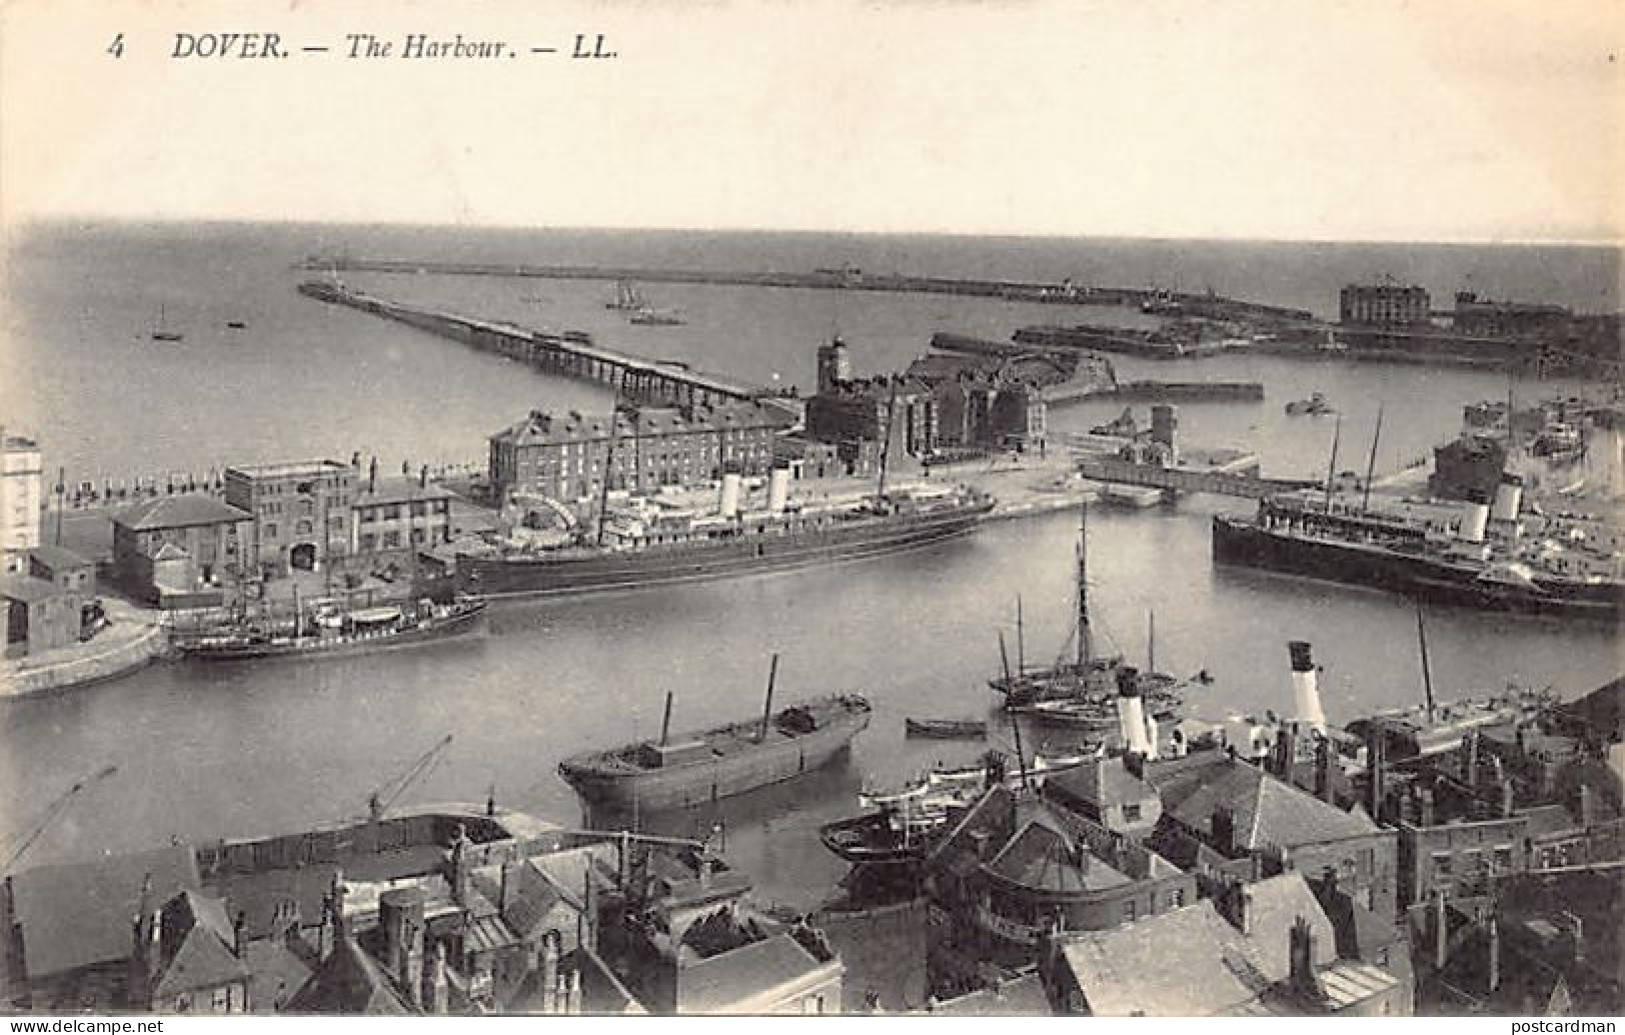 England - Kent - DOVER The Harbour - Publisher Levy LL. 4 - Dover